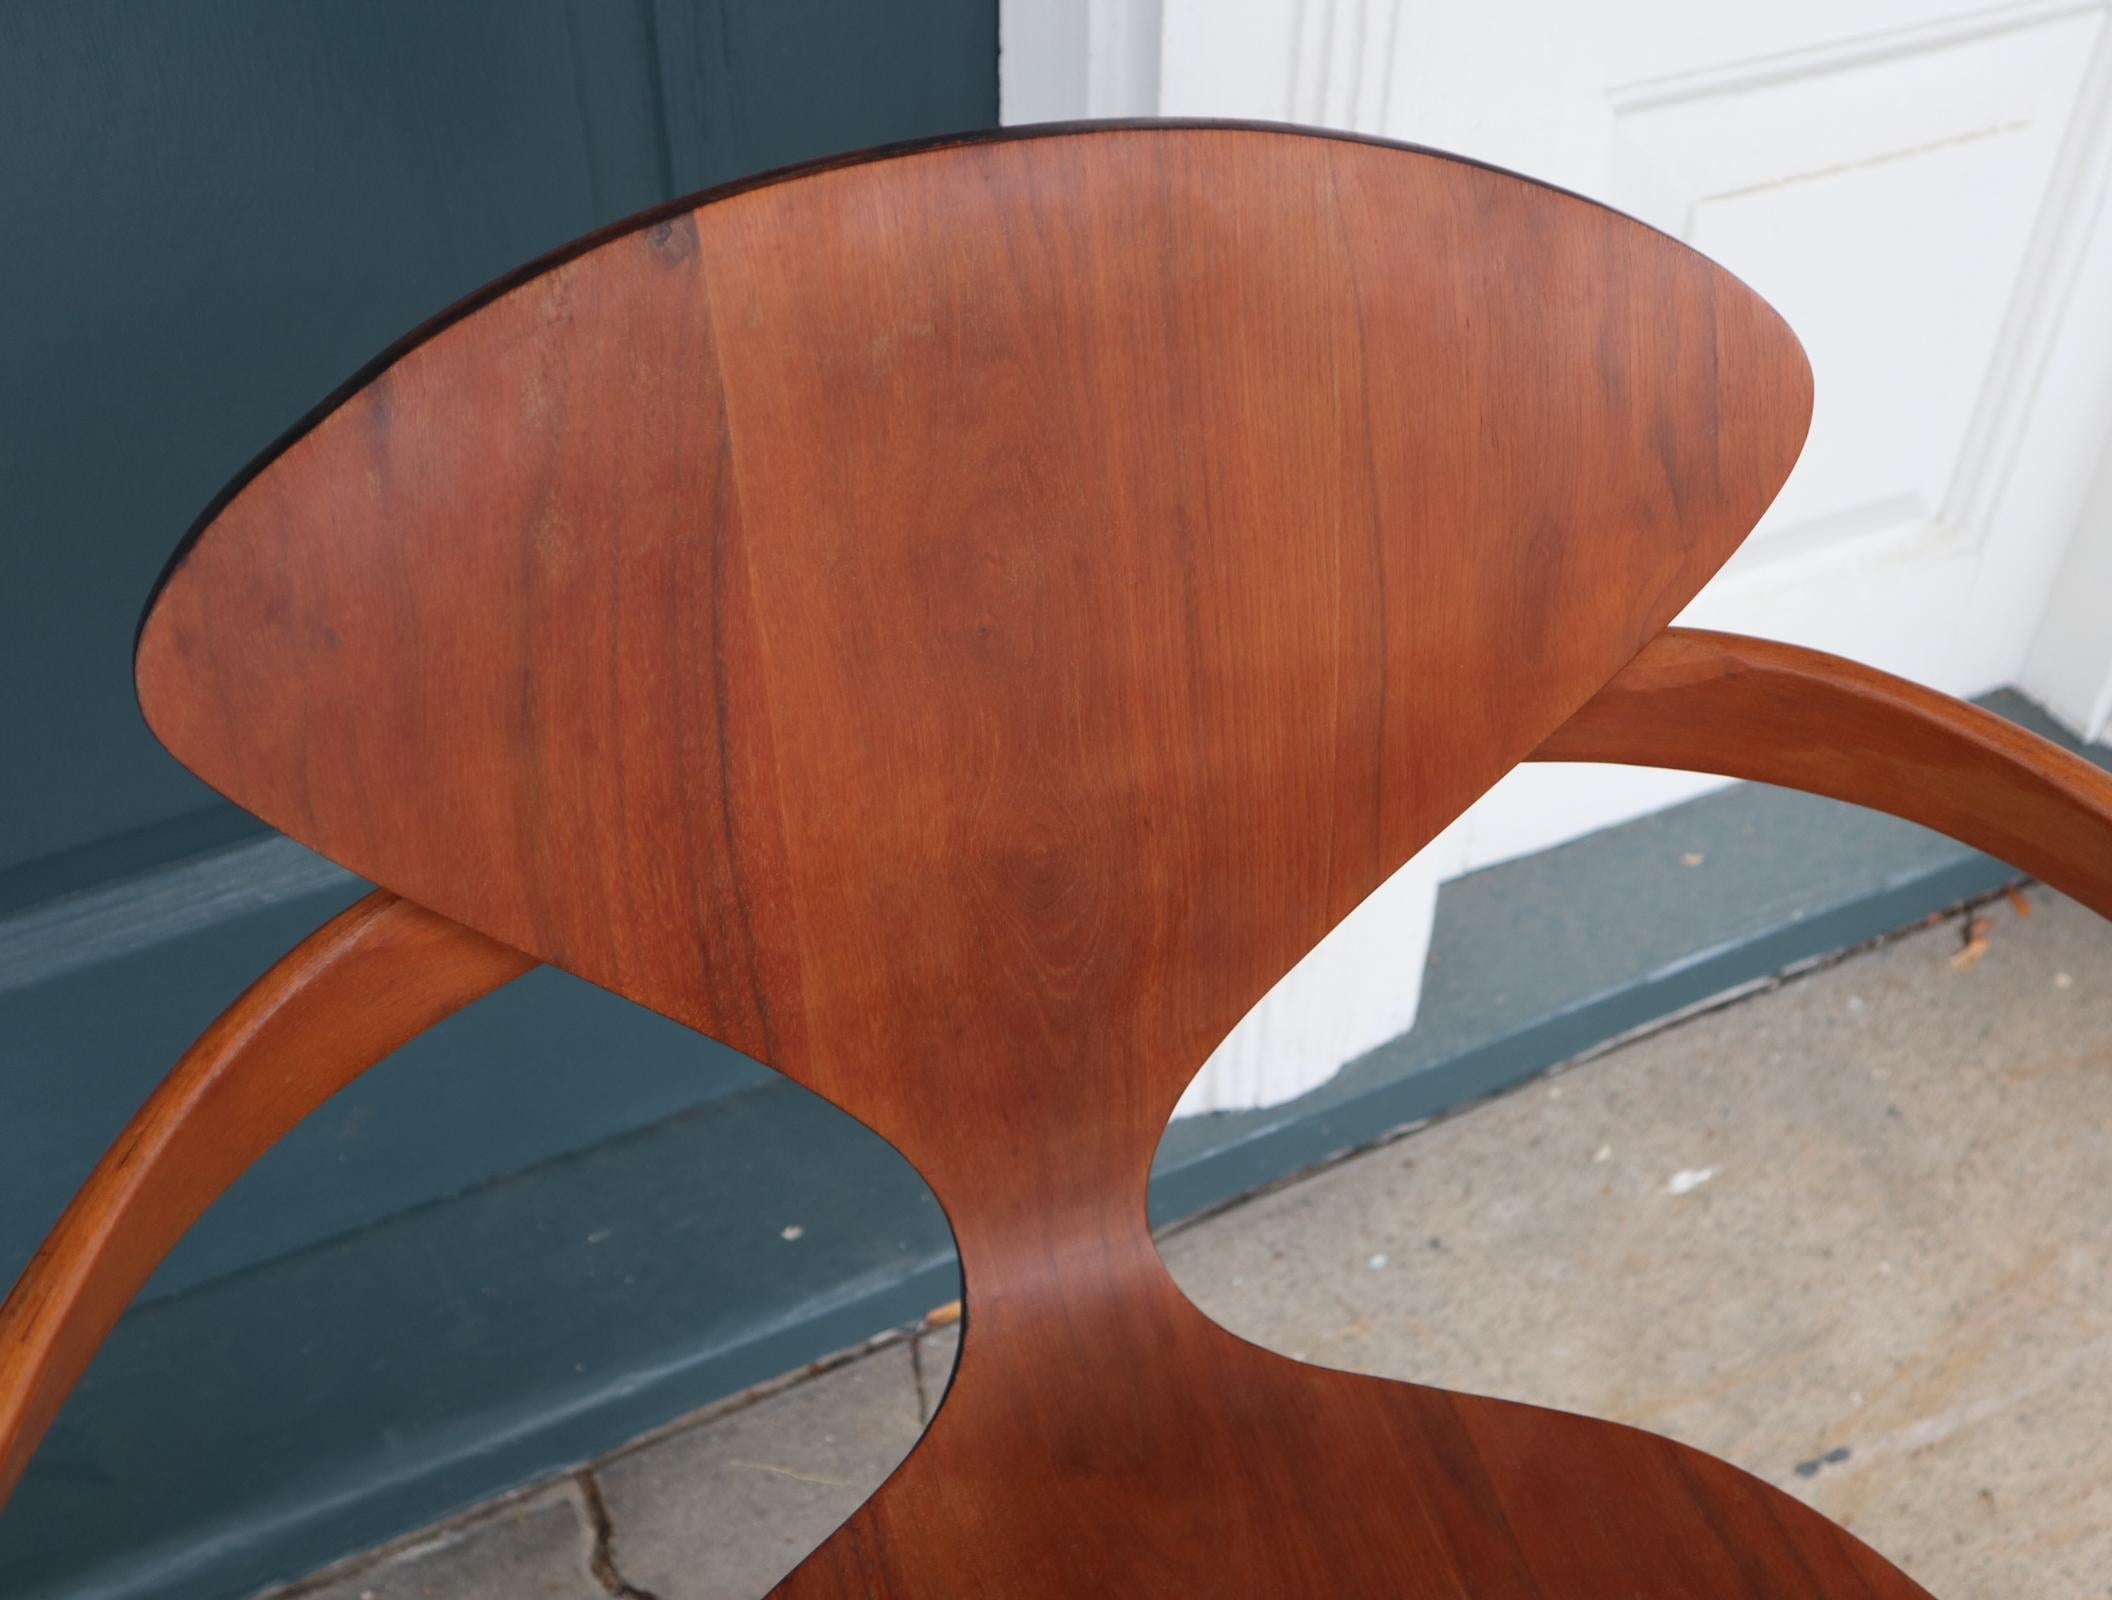 20th Century Pair of Norman Cherner Bentwood Pretzel Chairs in Walnut for Plycraft